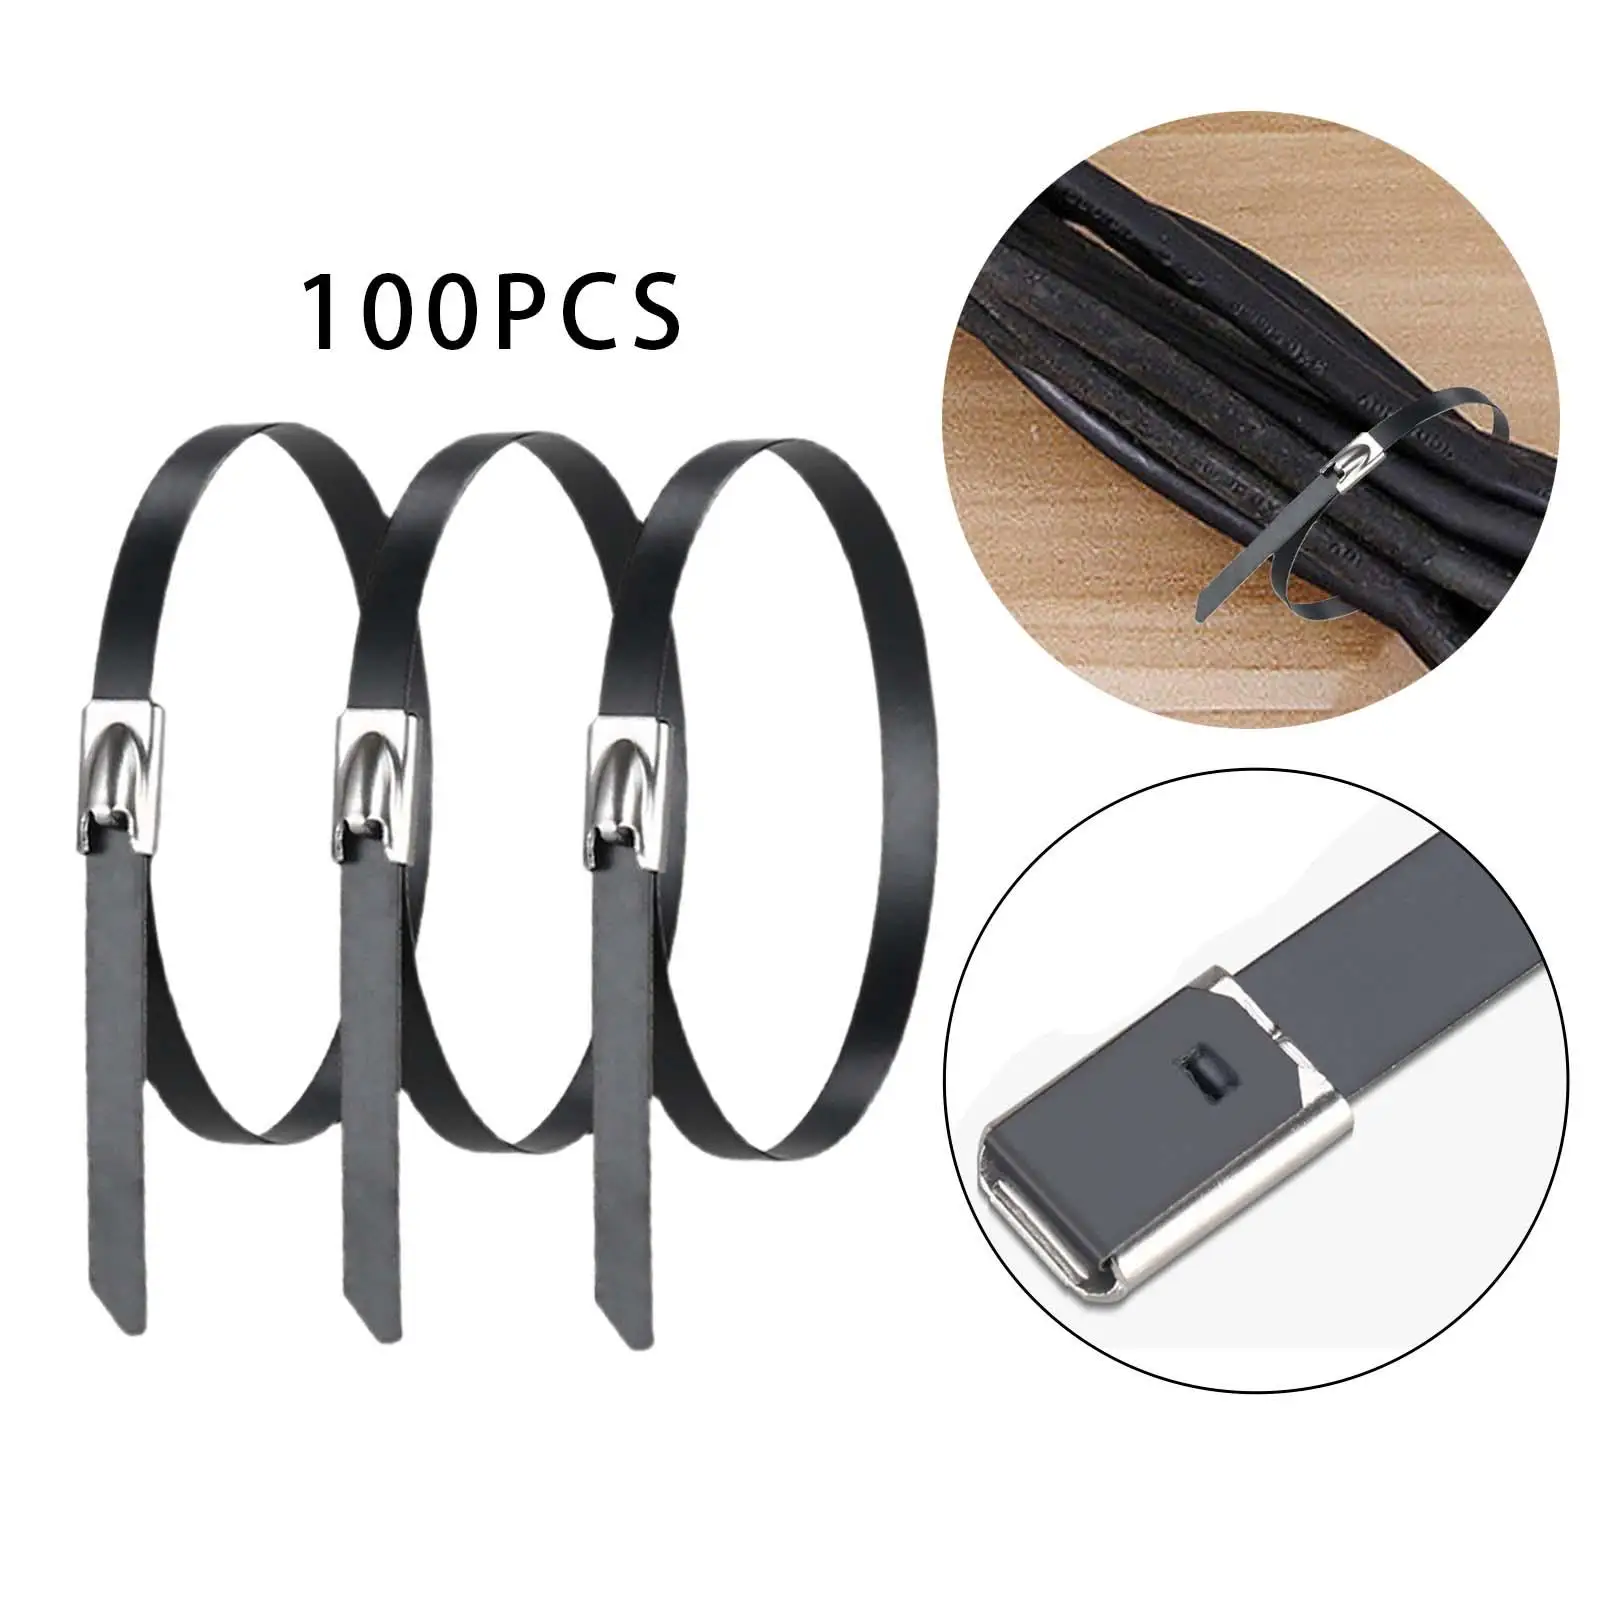 100 Pieces Self Locking Metal Zip Ties Stainless Steel Professional Accessory Heavy Duty Durable Multipurpose for Wire Harness